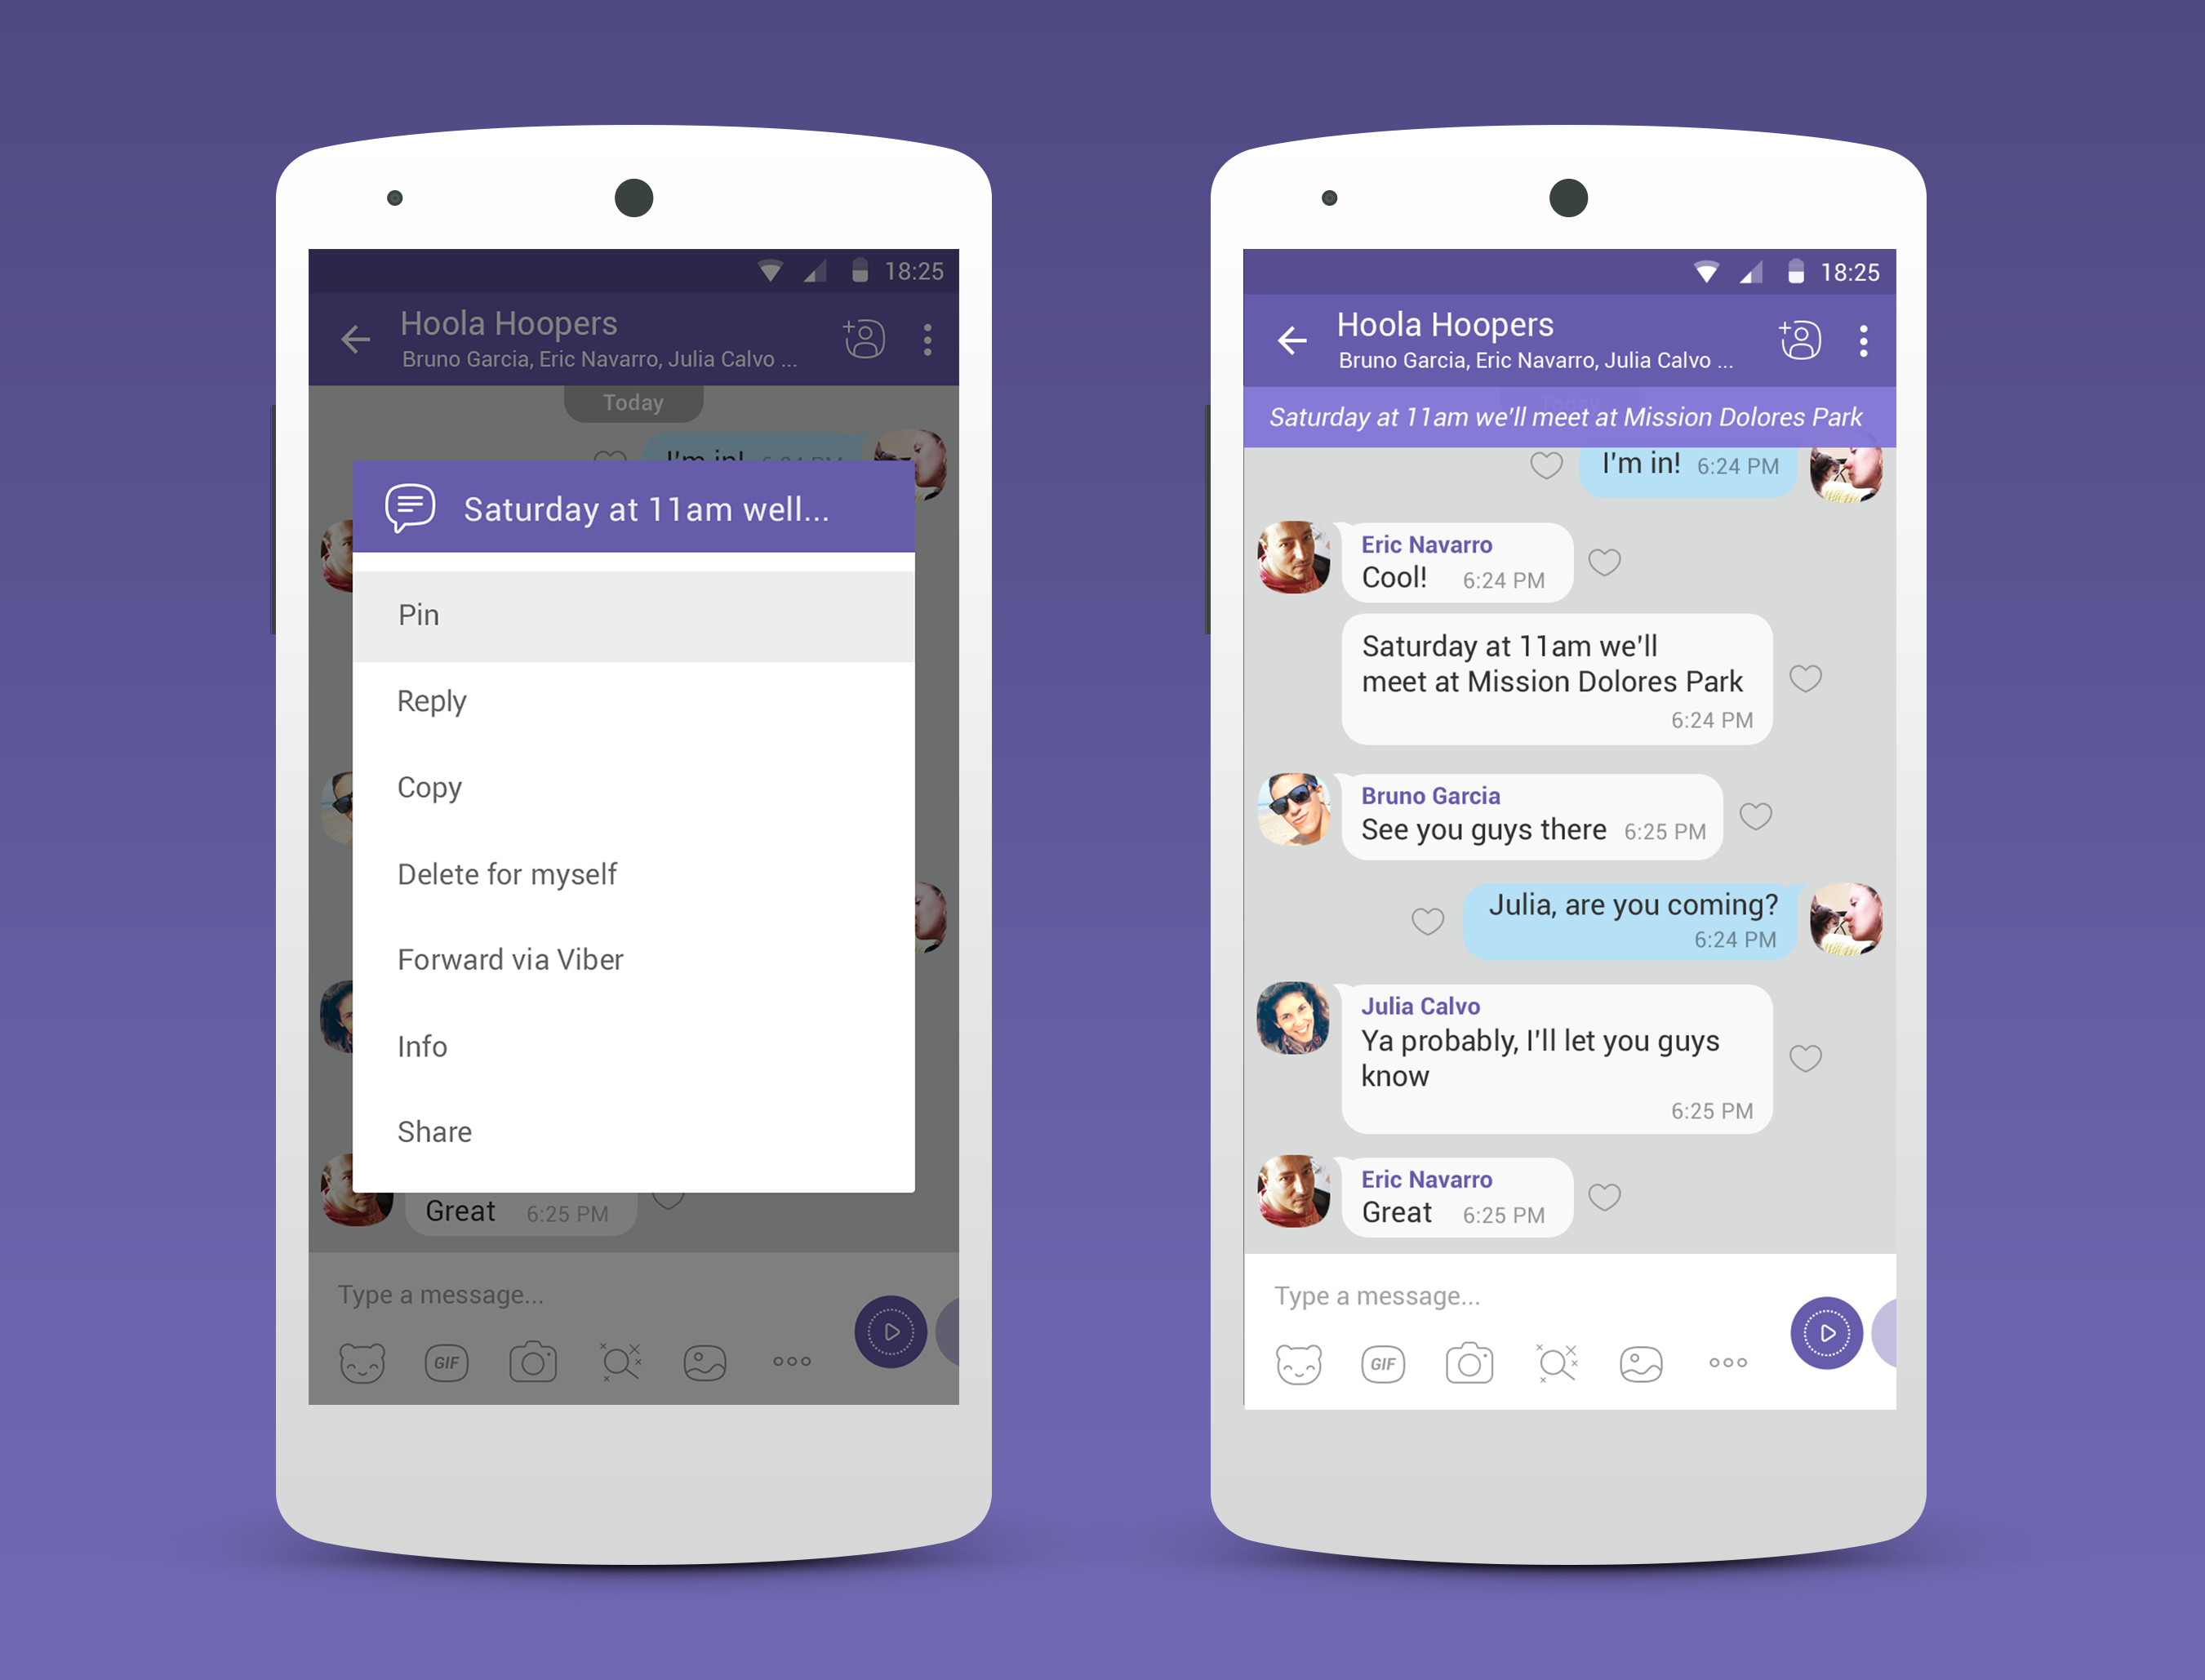 Pinned messages - Latest Viber update brings pinned messages, replies in group, more